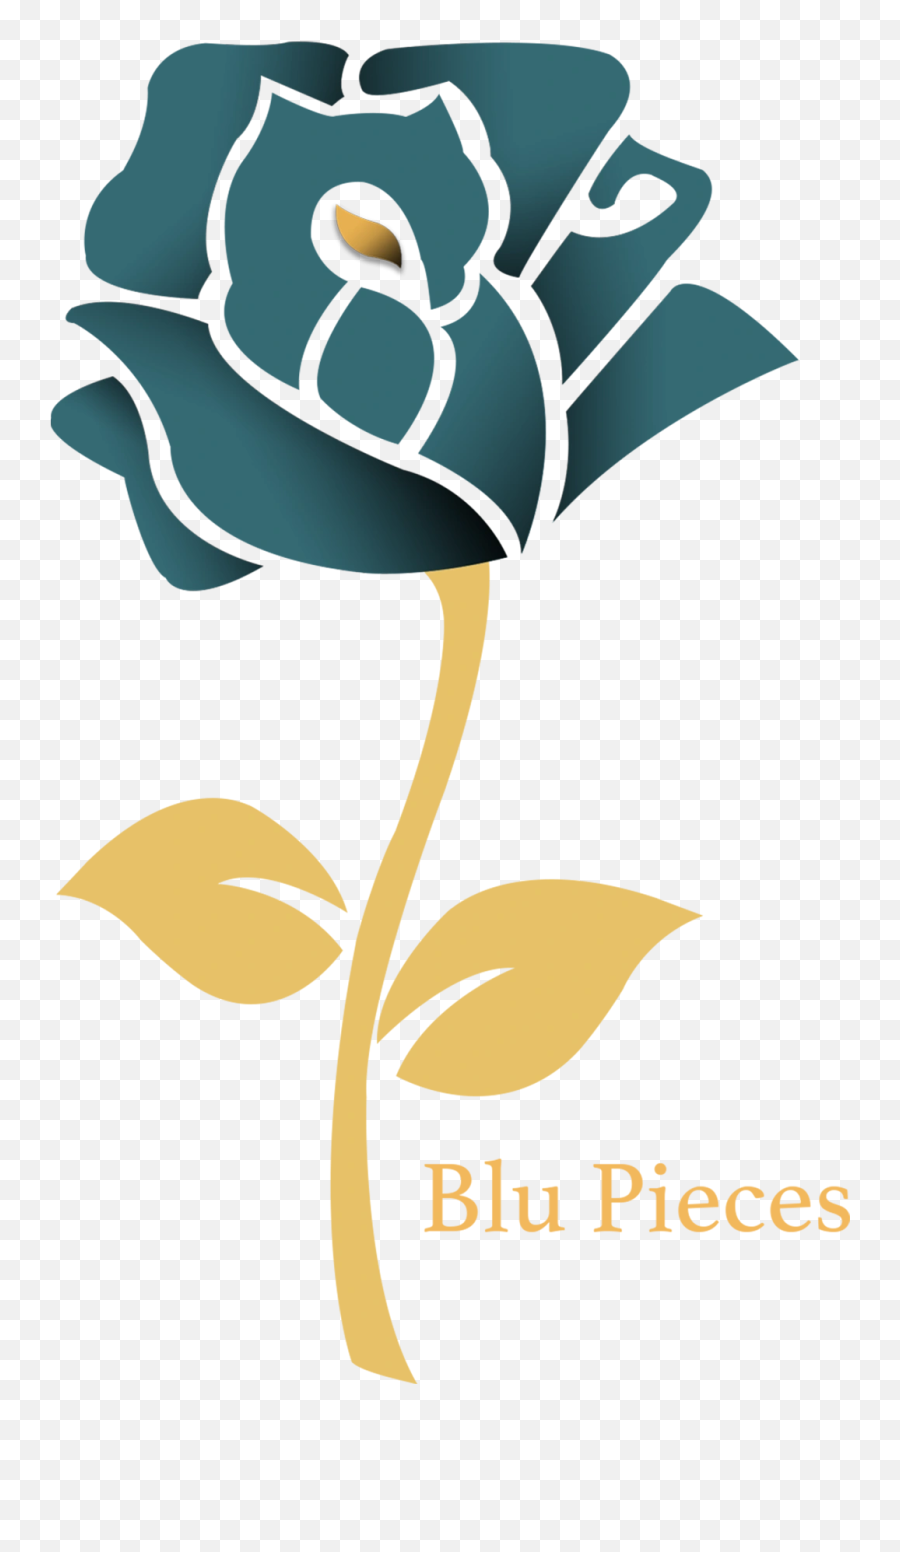 Blupieces - Gold Accessories Gold Earrings Hoop Earrings Floral Png,Blue Rose Icon